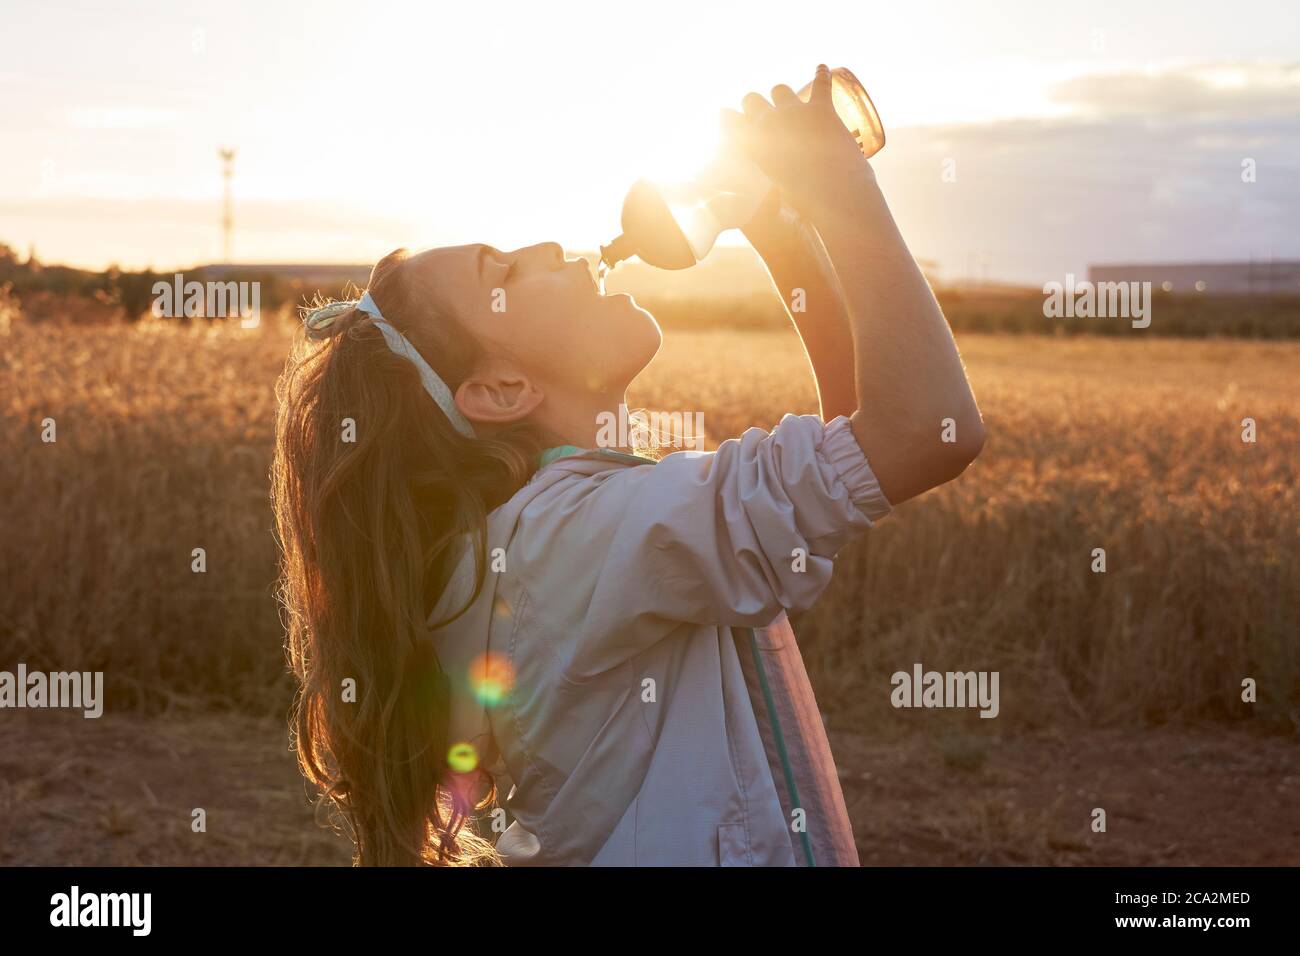 girl drinking water from a bottle at sunset Stock Photo